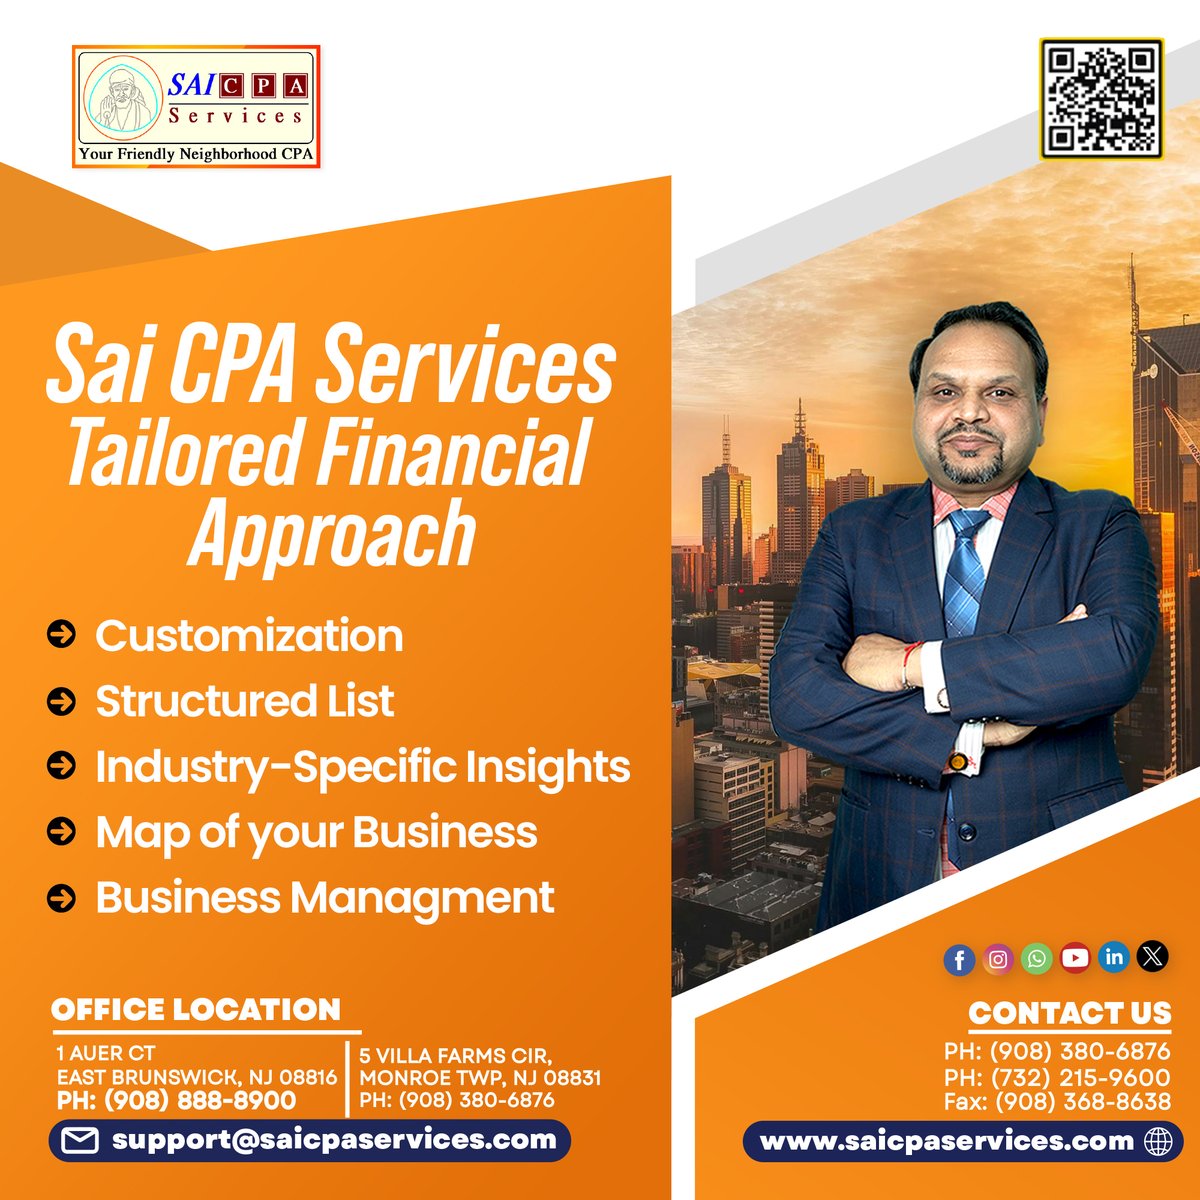 Sai CPA Services Tailored Financial Approach
Contact Us: saicpaservices.com
(908) 380-6876
#TailoredFinancialApproach #CustomizedSolutions #IndustryInsights #BusinessMapping #FinancialManagement #StructuredLists #CPAExpertise